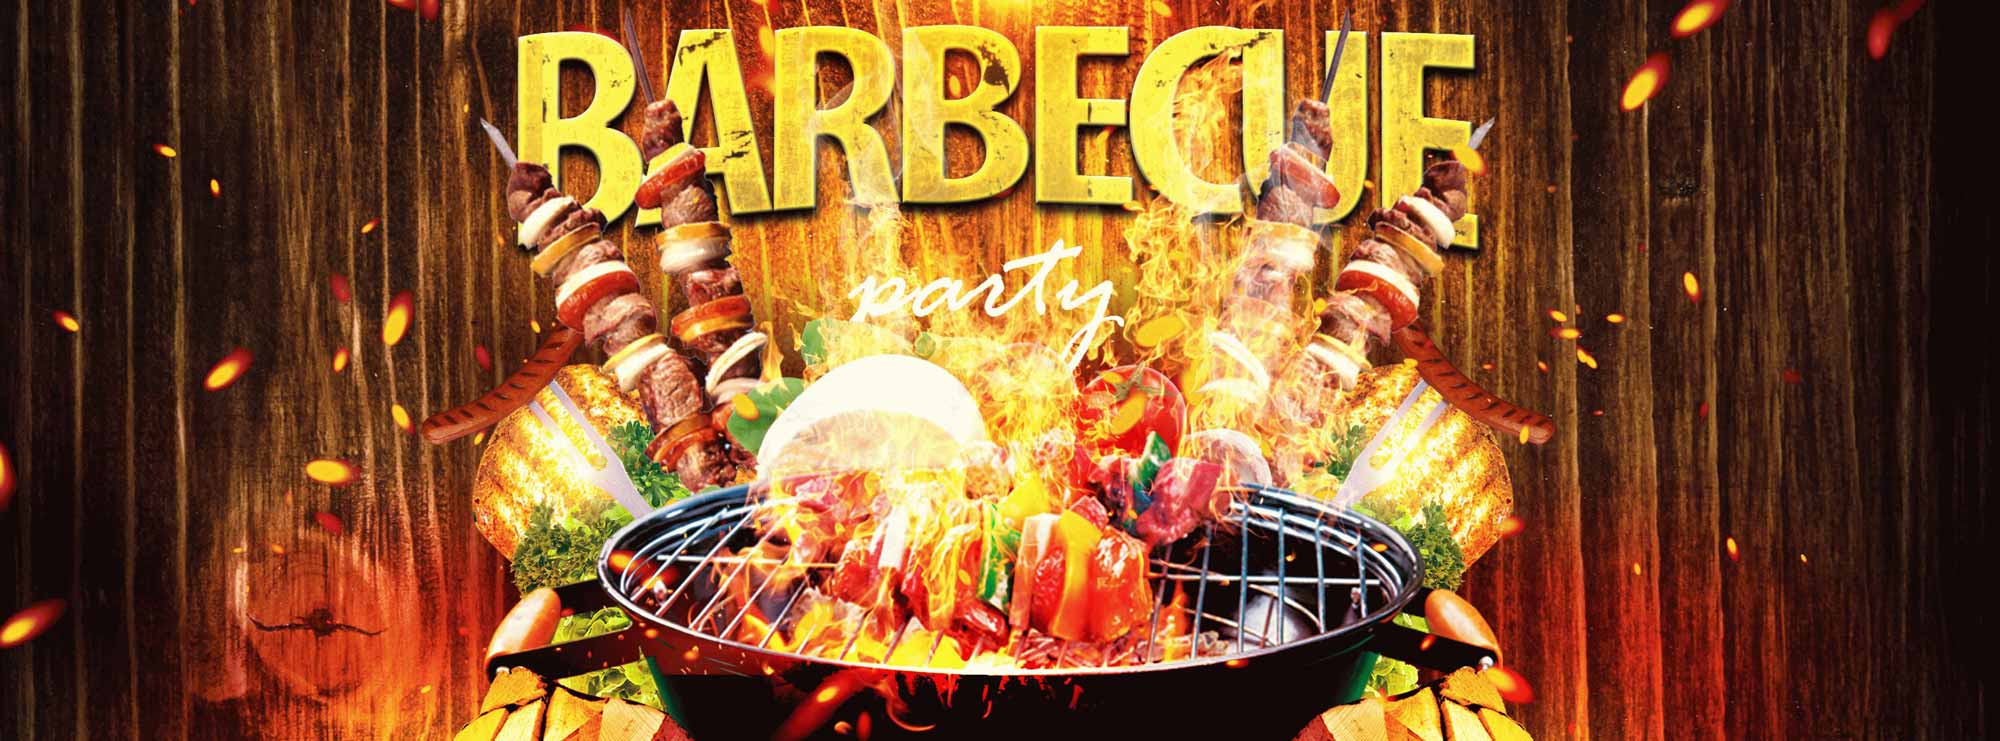 Barbecue PSD Flyer Template